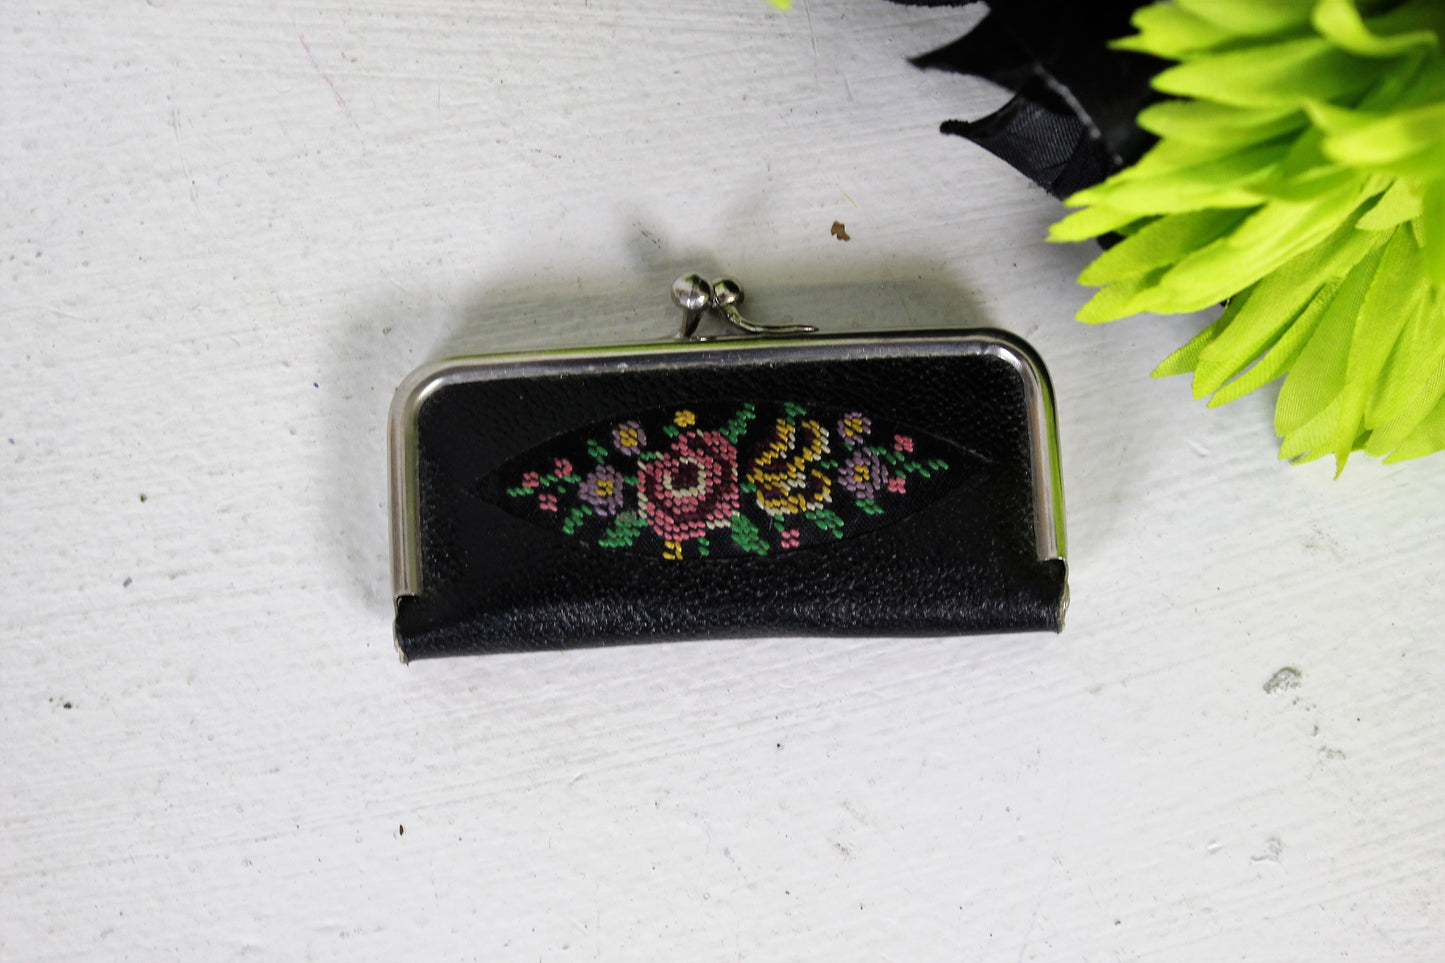 Vintage 1940s 1950s Black Tapestry Manicure Kit Made in Germany / Leather And Needlepoint Petit Point Travel Toiletry Set / Floral Flowers